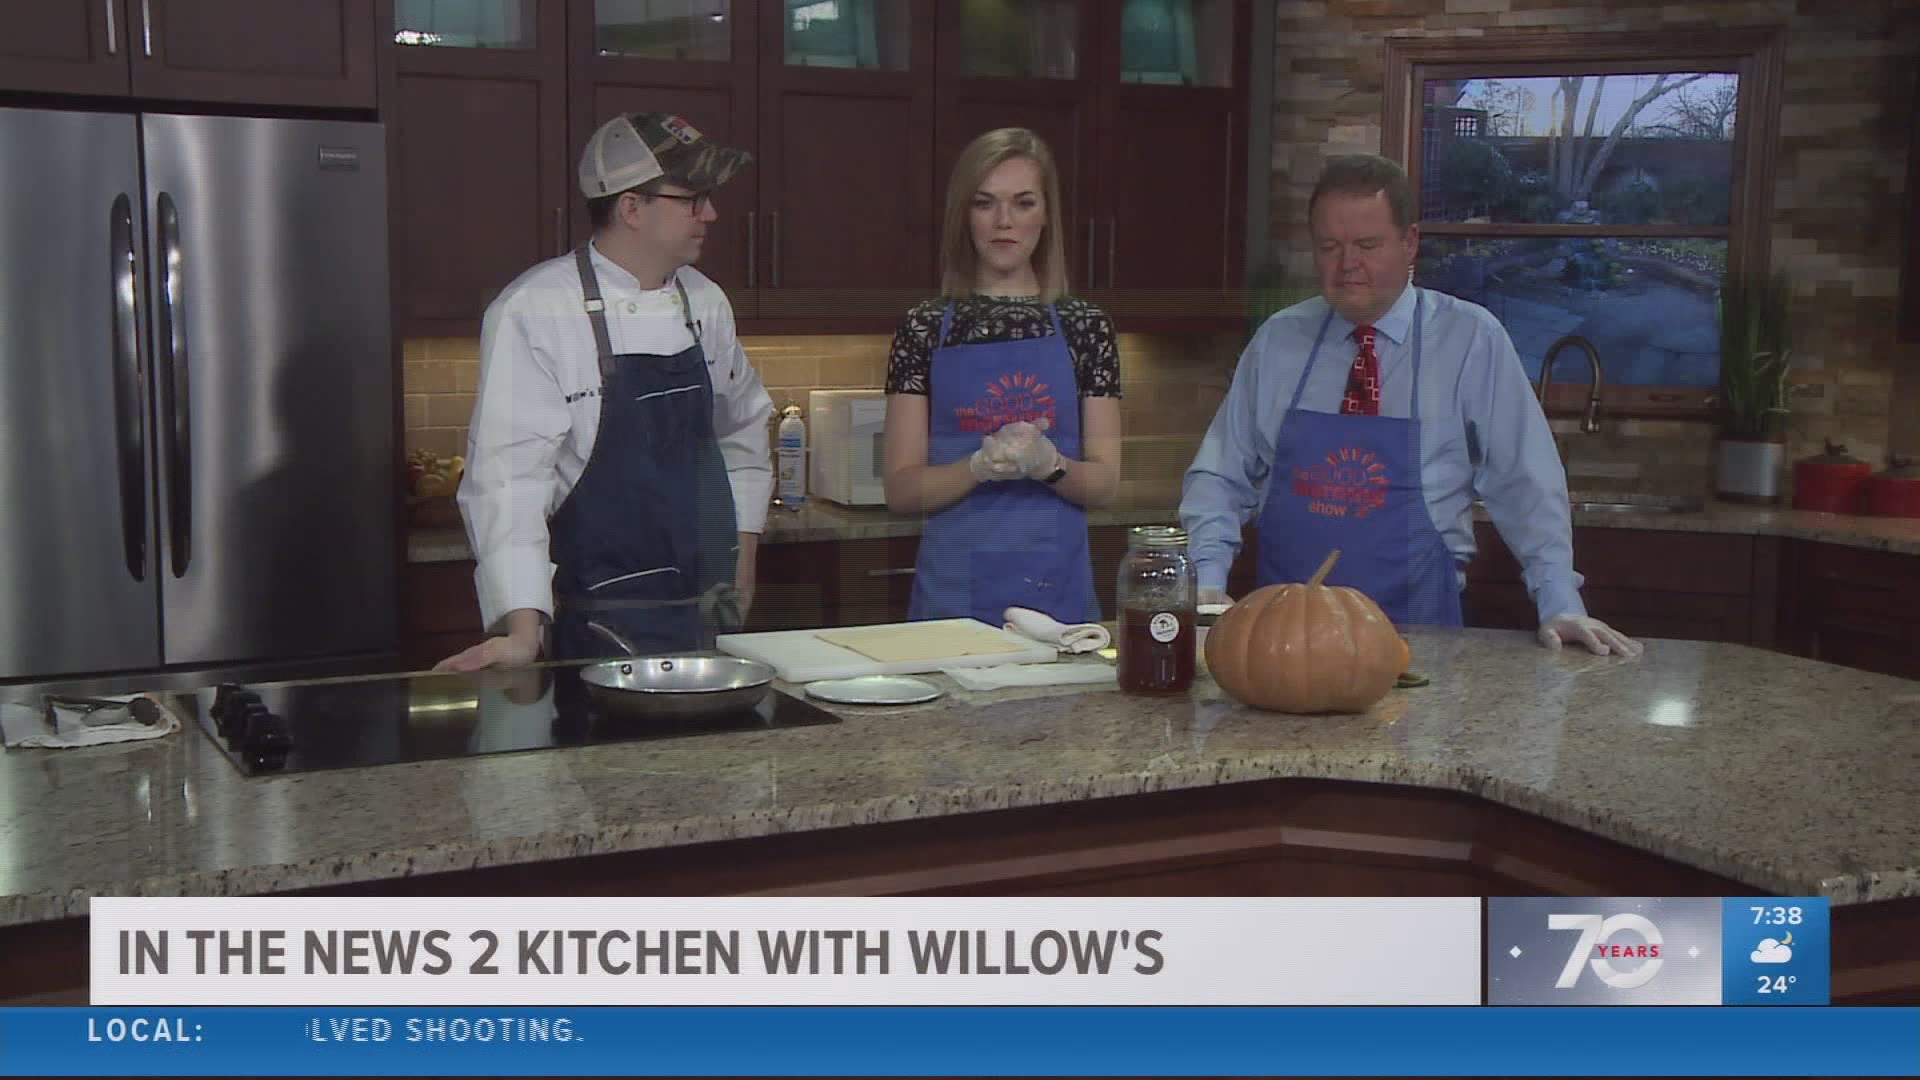 North Carolina’s Chef of the Year joins us to make baked brie and shrimp salad. Enjoy!